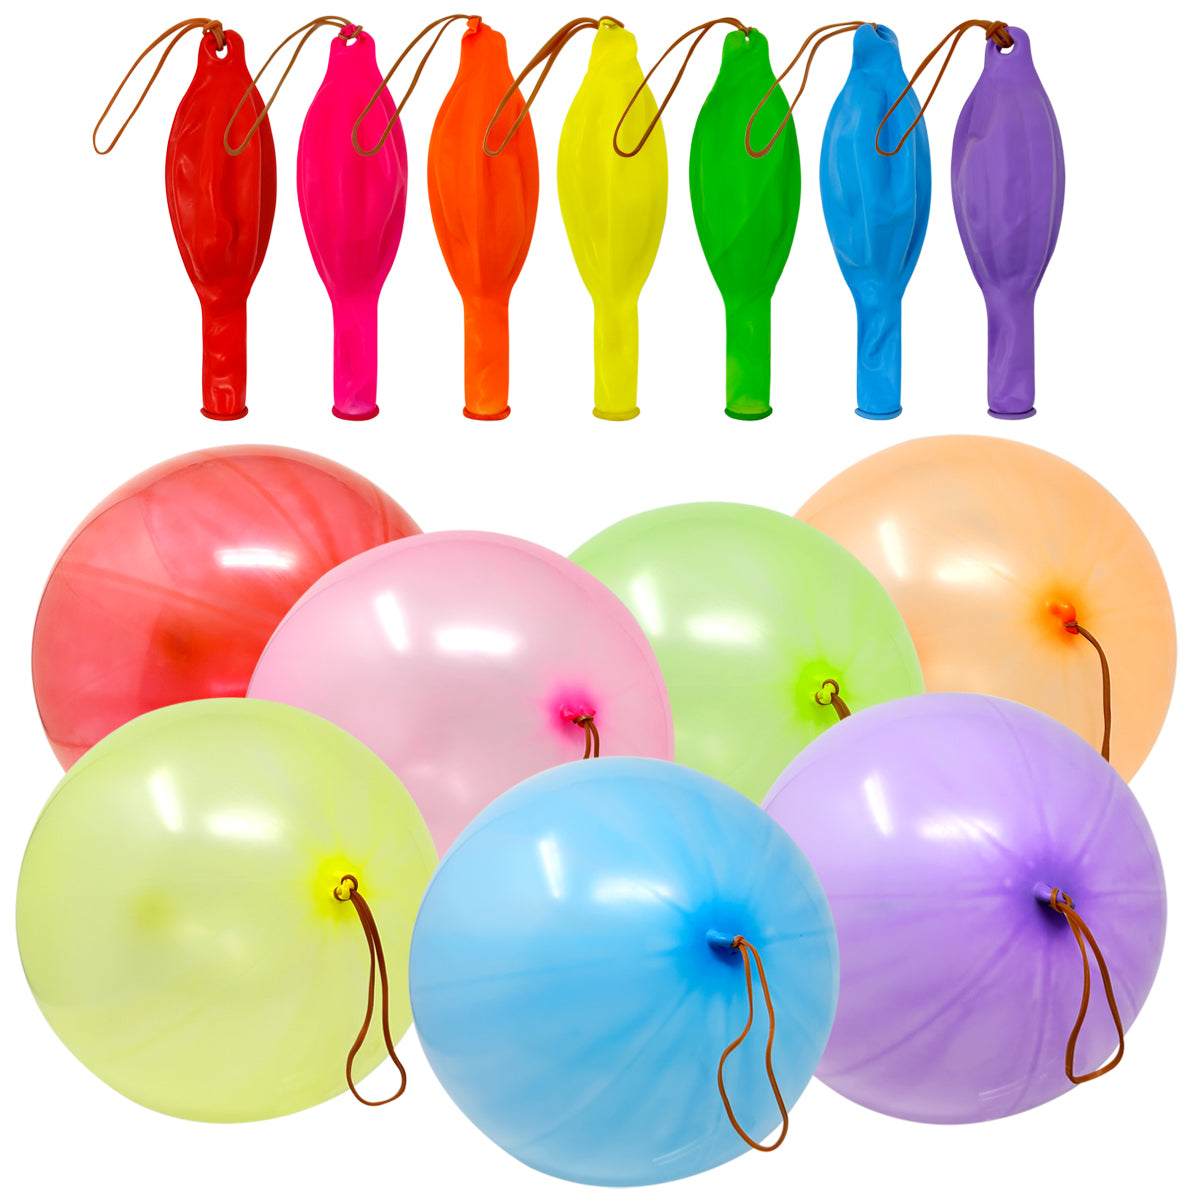 Wrapables Punching Balloons with Rubber Band Handles for Party Favors, Birthday Parties (Set of 21), Multicolor